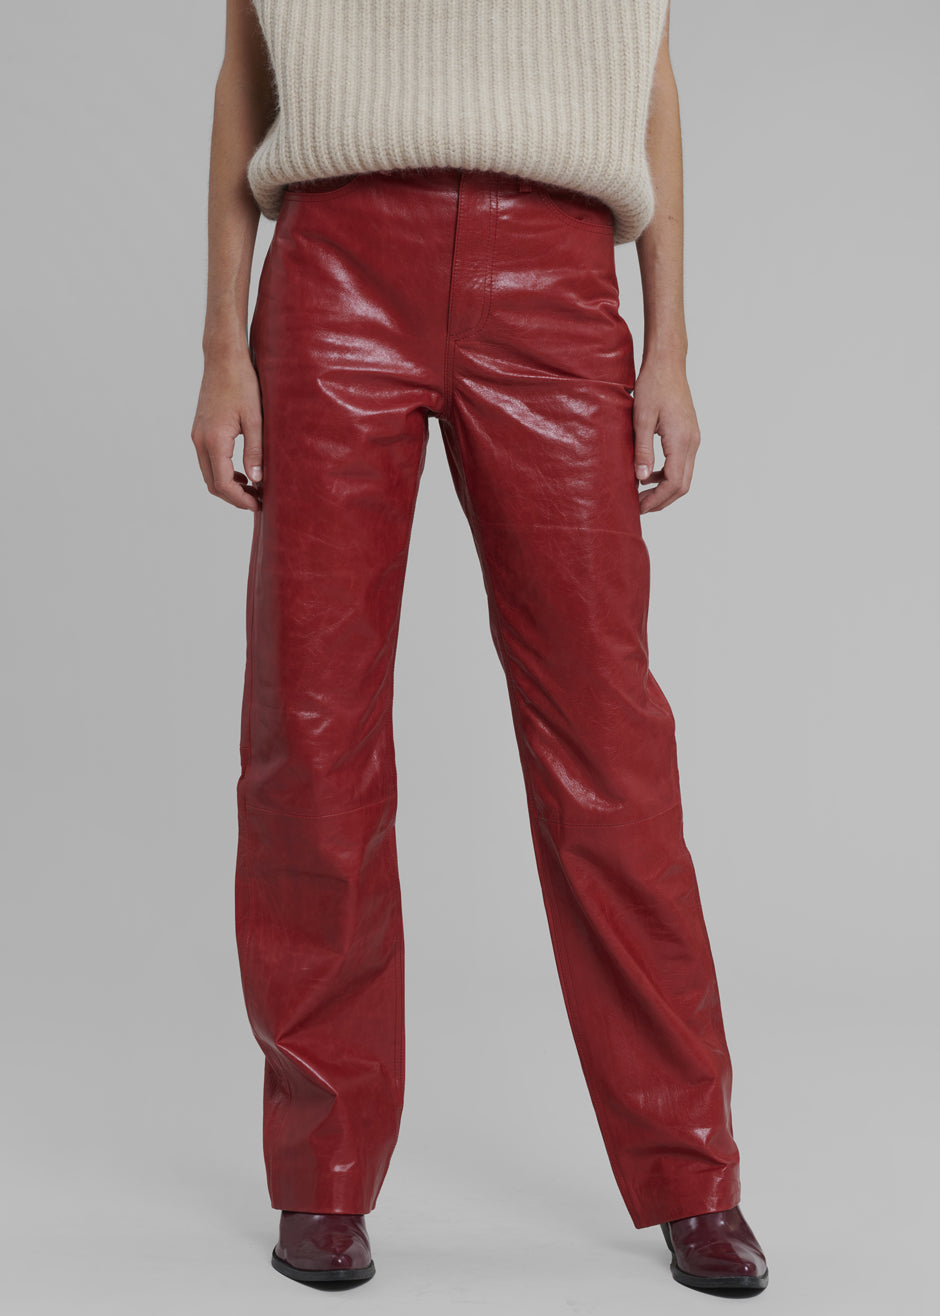 REMAIN Pants Crunchy Leather - Chili Pepper - 2